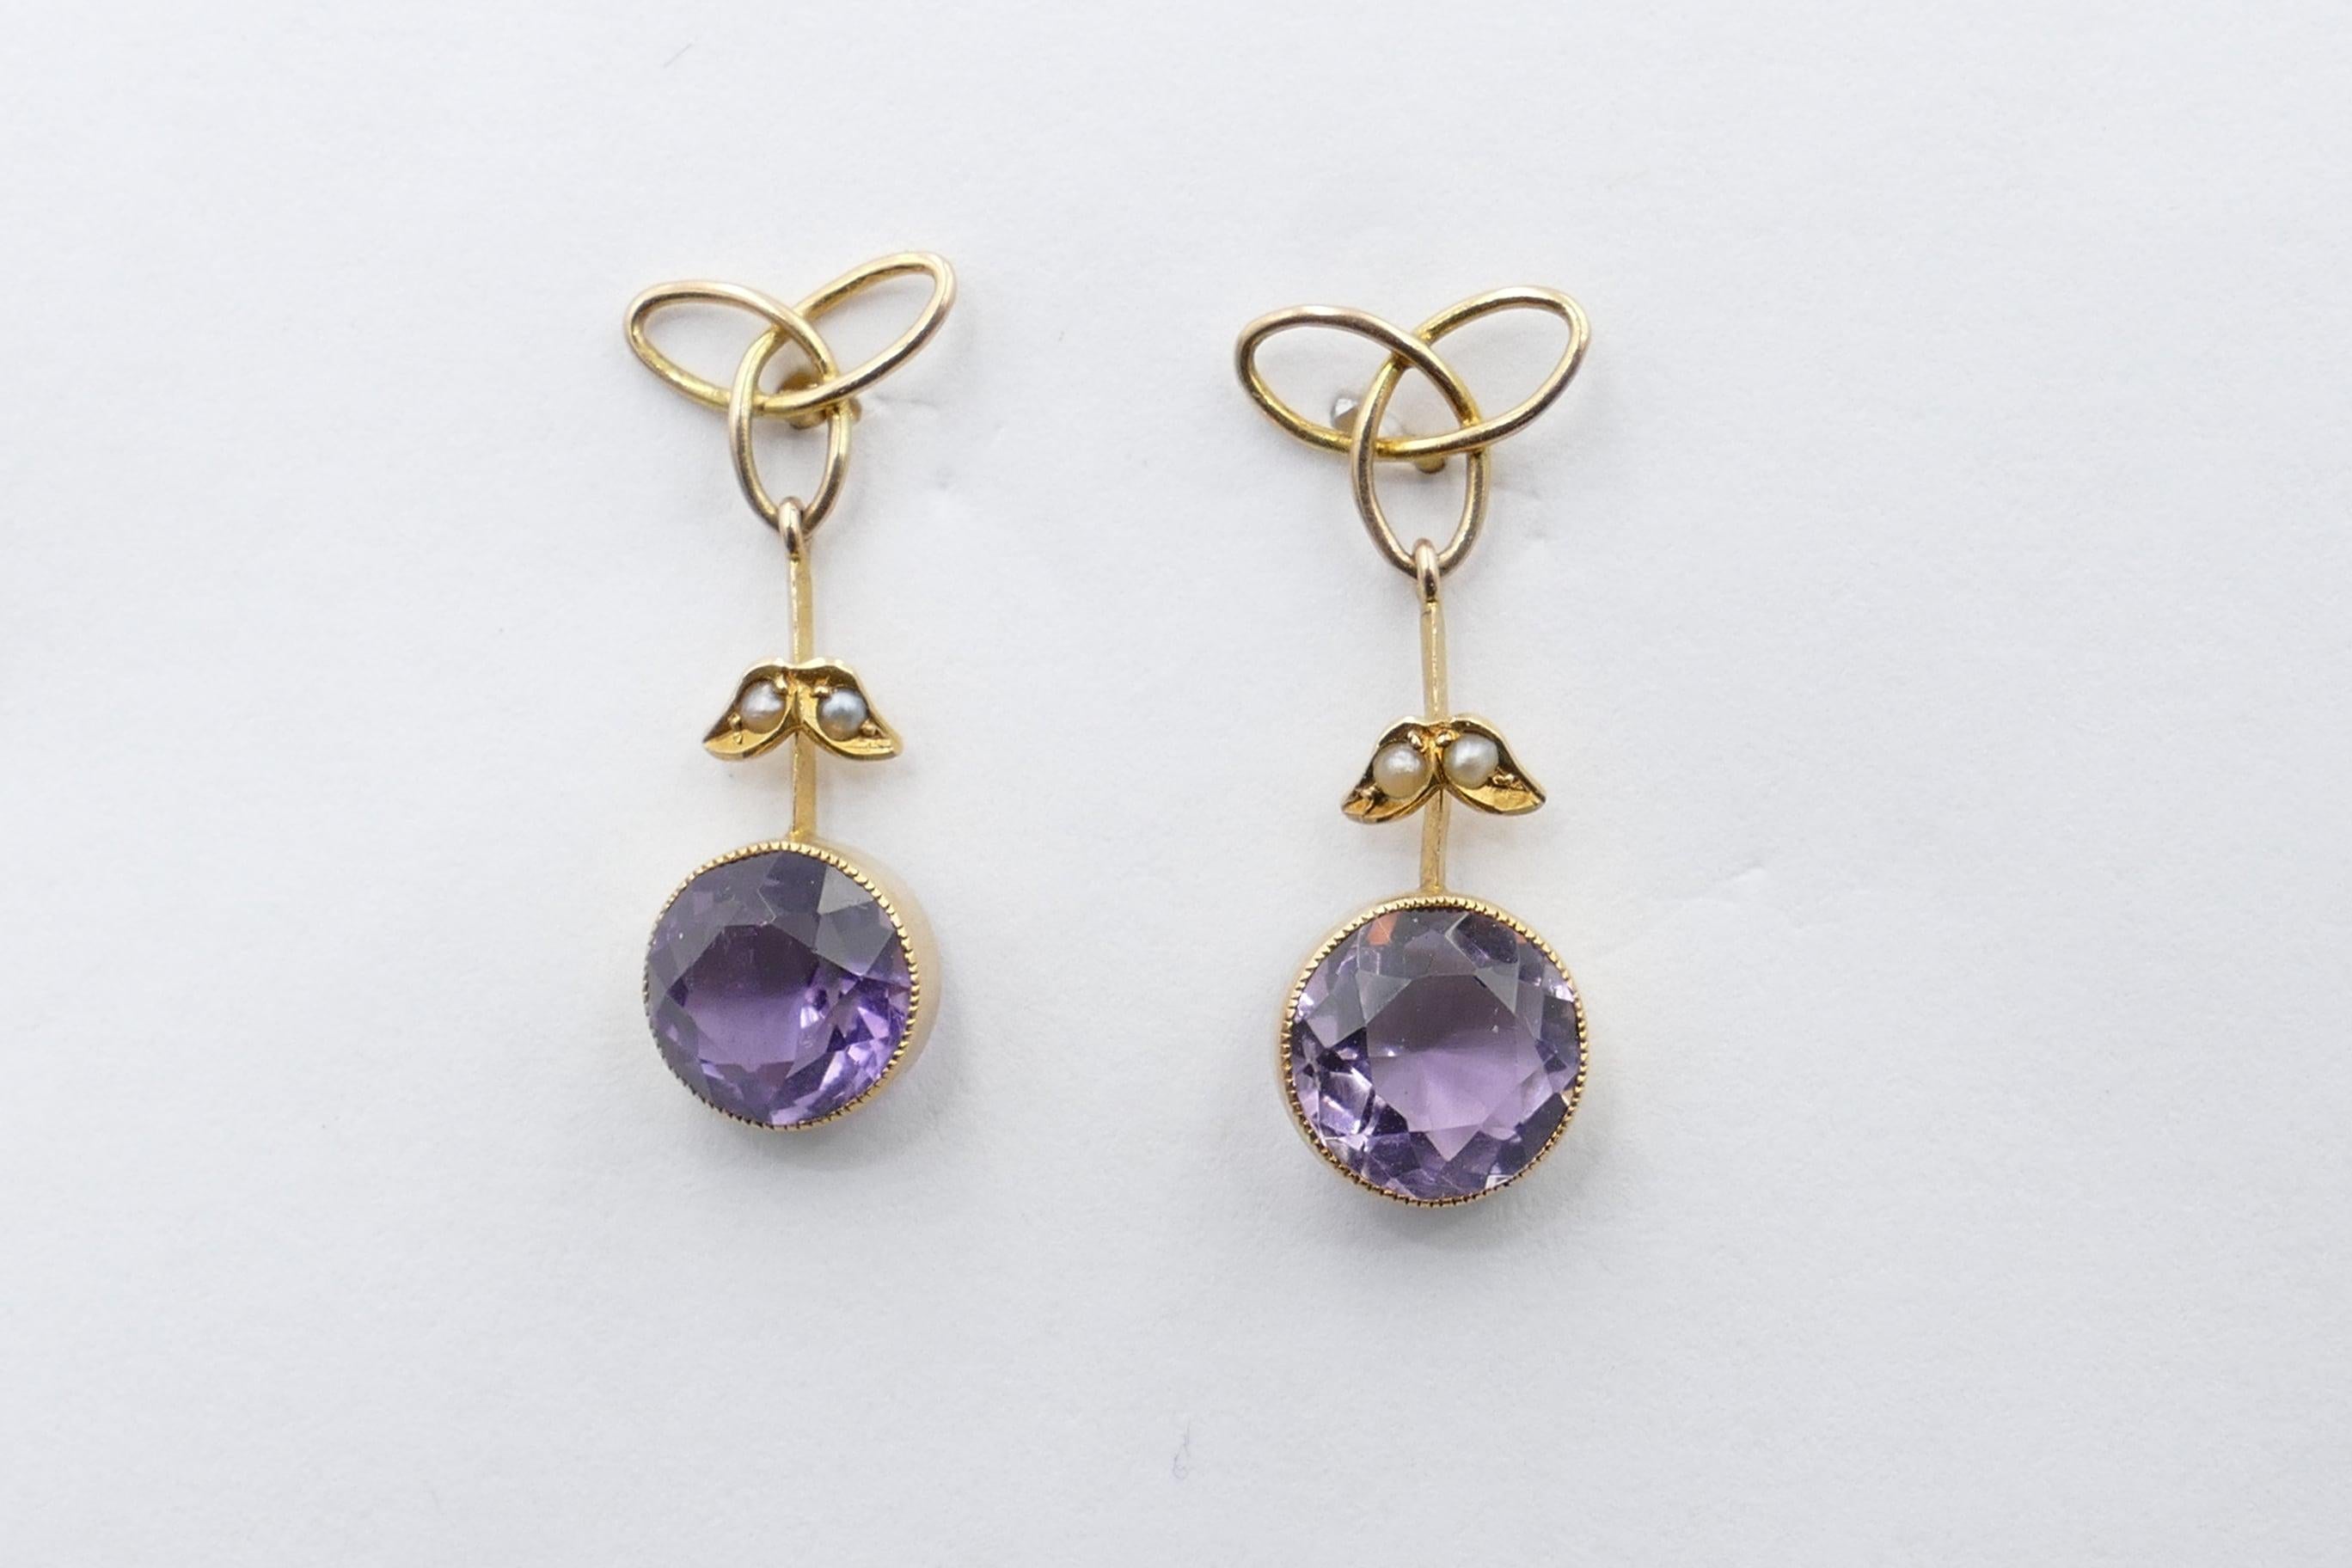 Retailed by well known Melbourne High Class Jewellers Catanachs, this pair of Antique Earrings features 2 strong, medium purple in Colour, Amethysts, Clarity eye-clean, Round Cut, Bezel Set, with 4 Seed Pearls, white in colour with silver overtones.